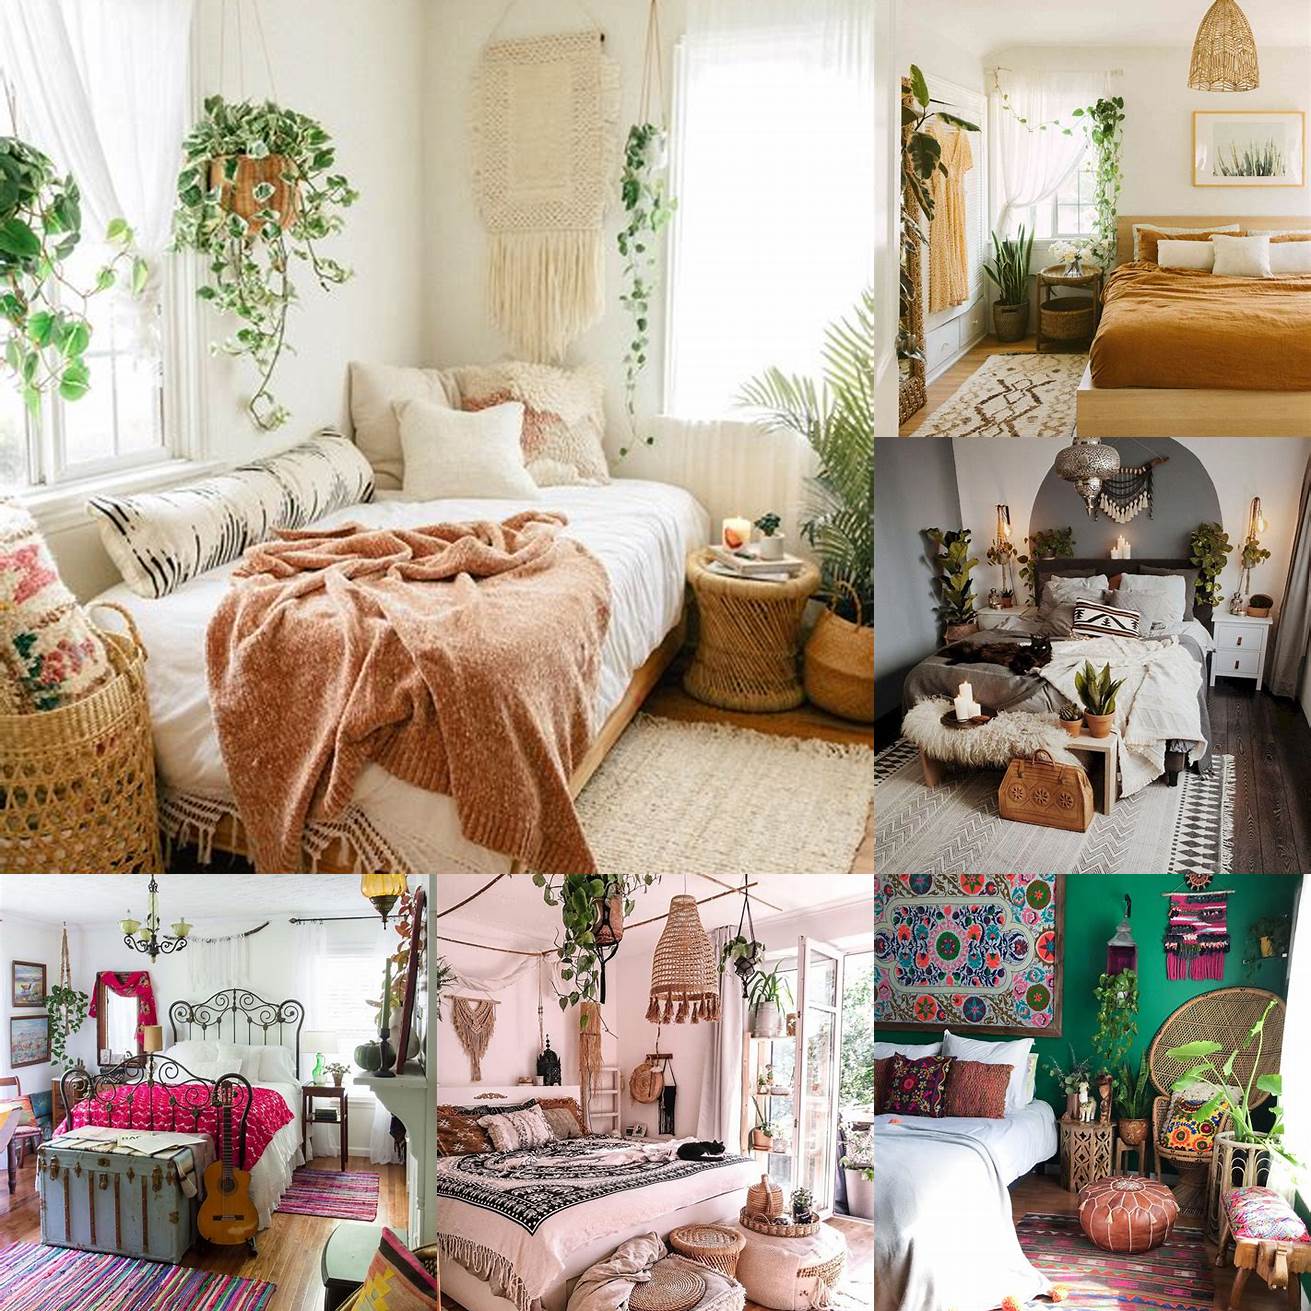 Full day bed in a bohemian bedroom